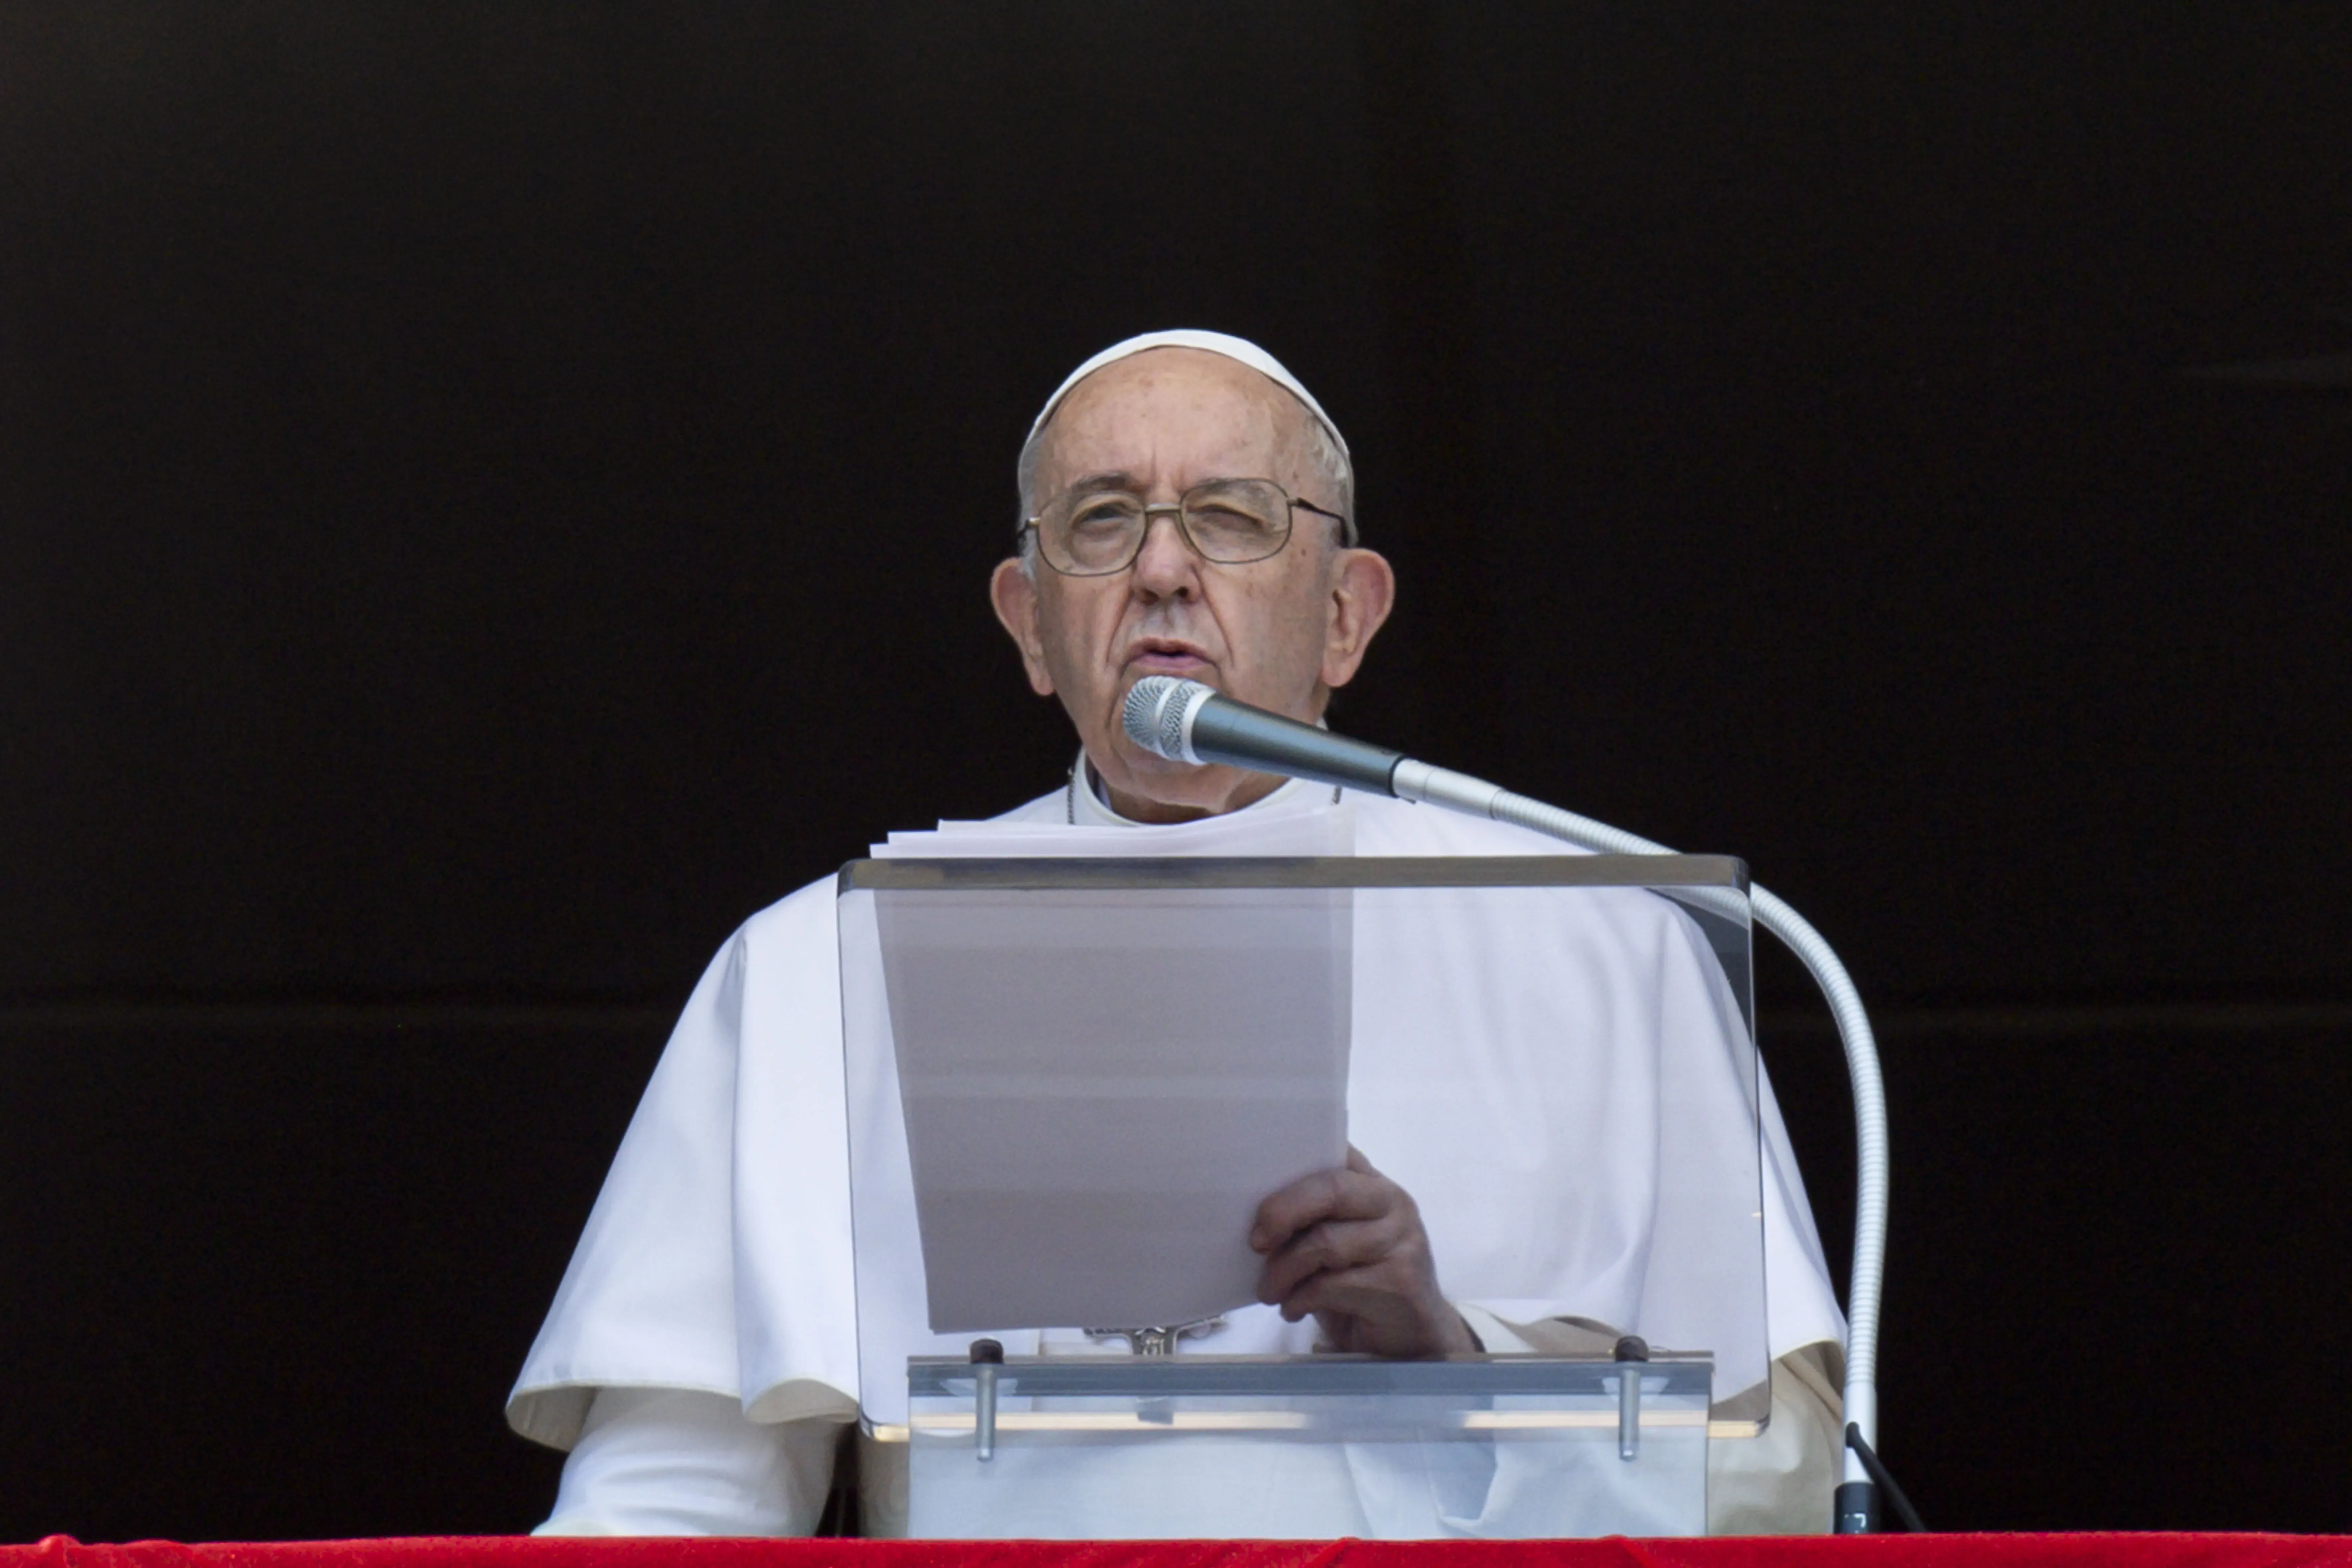 Pope Francis gives his weekly Angelus address Sunday, Aug. 7, 2022. Vatican Media